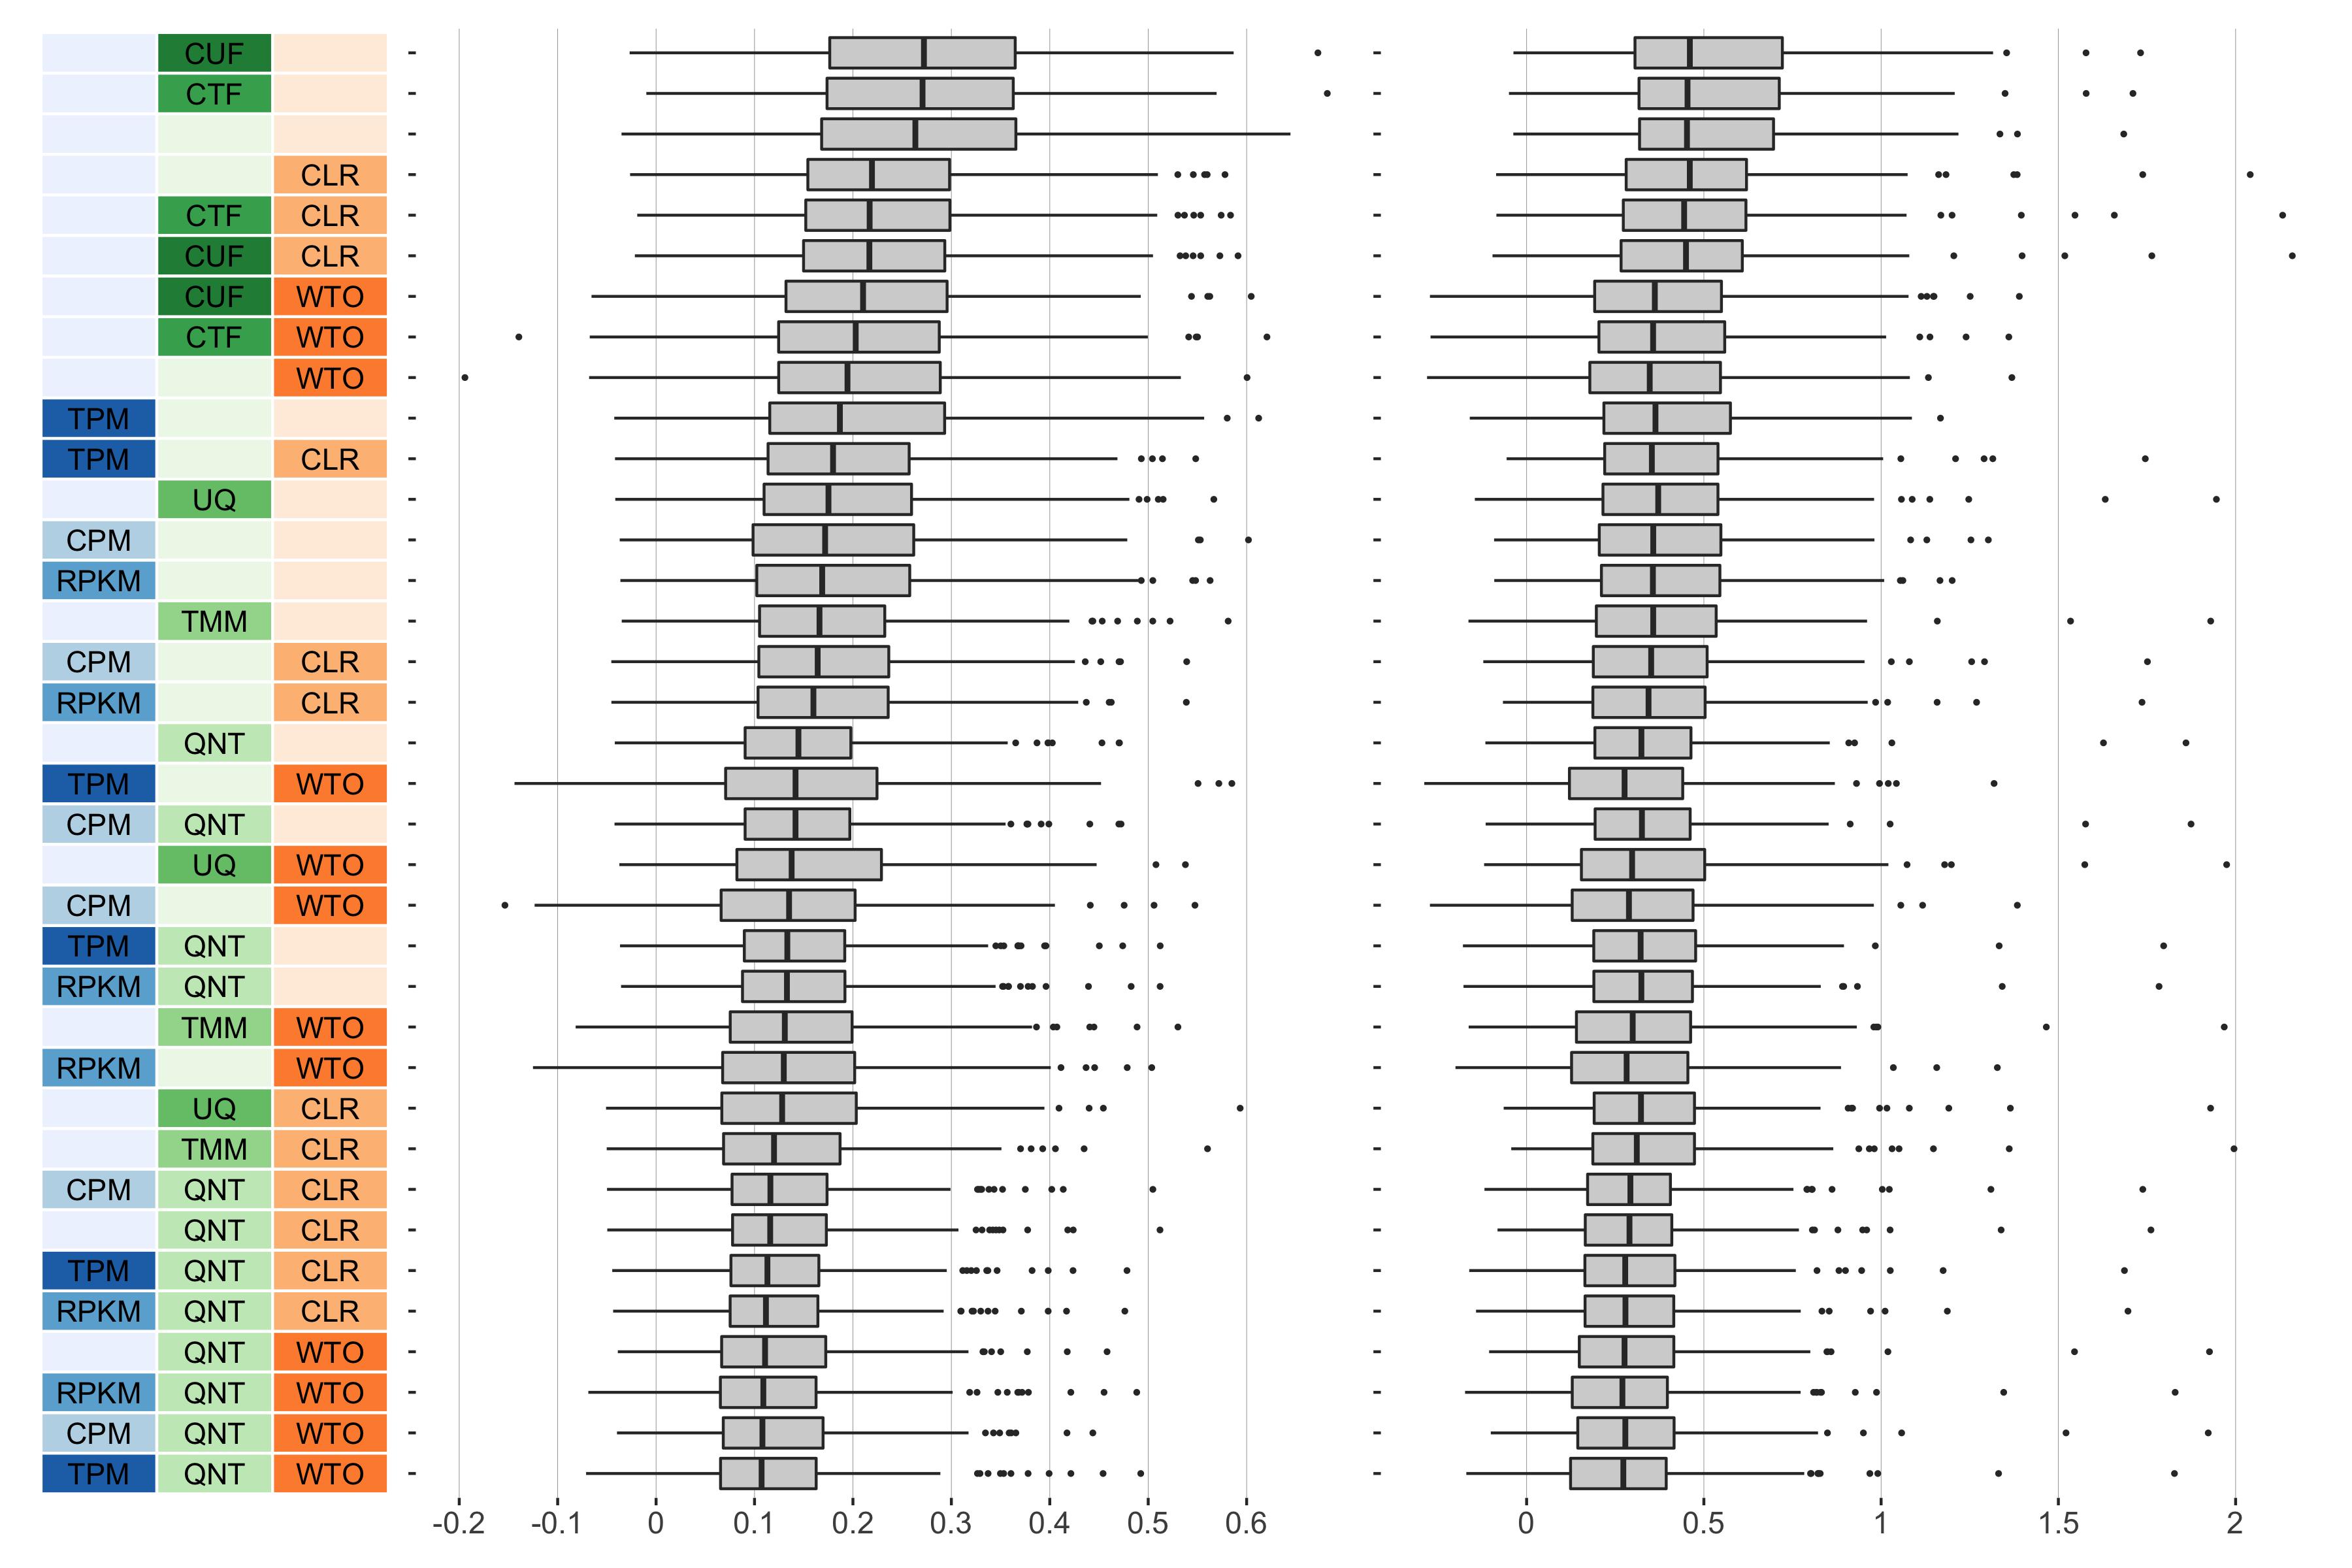 **Overall performance of workflows.** The plots show the aggregate accuracy of all SRA coexpression networks resulting from each individual workflow evaluated using the (**left**) tissue-naive and (**right**) tissue-aware gold standards. The workflows (rows) are described in terms of the specific method used in the within-sample normalization (blues), between-sample normalization (greens), and network transformation (oranges) stages. The performance of each workflow is presented as boxplots that summarizes the log2(auPRC/prior) of each workflow where auPRC is the area under the precision recall curve. The workflows are ordered by their median log2(auPRC/prior) for the tissue-naive data.